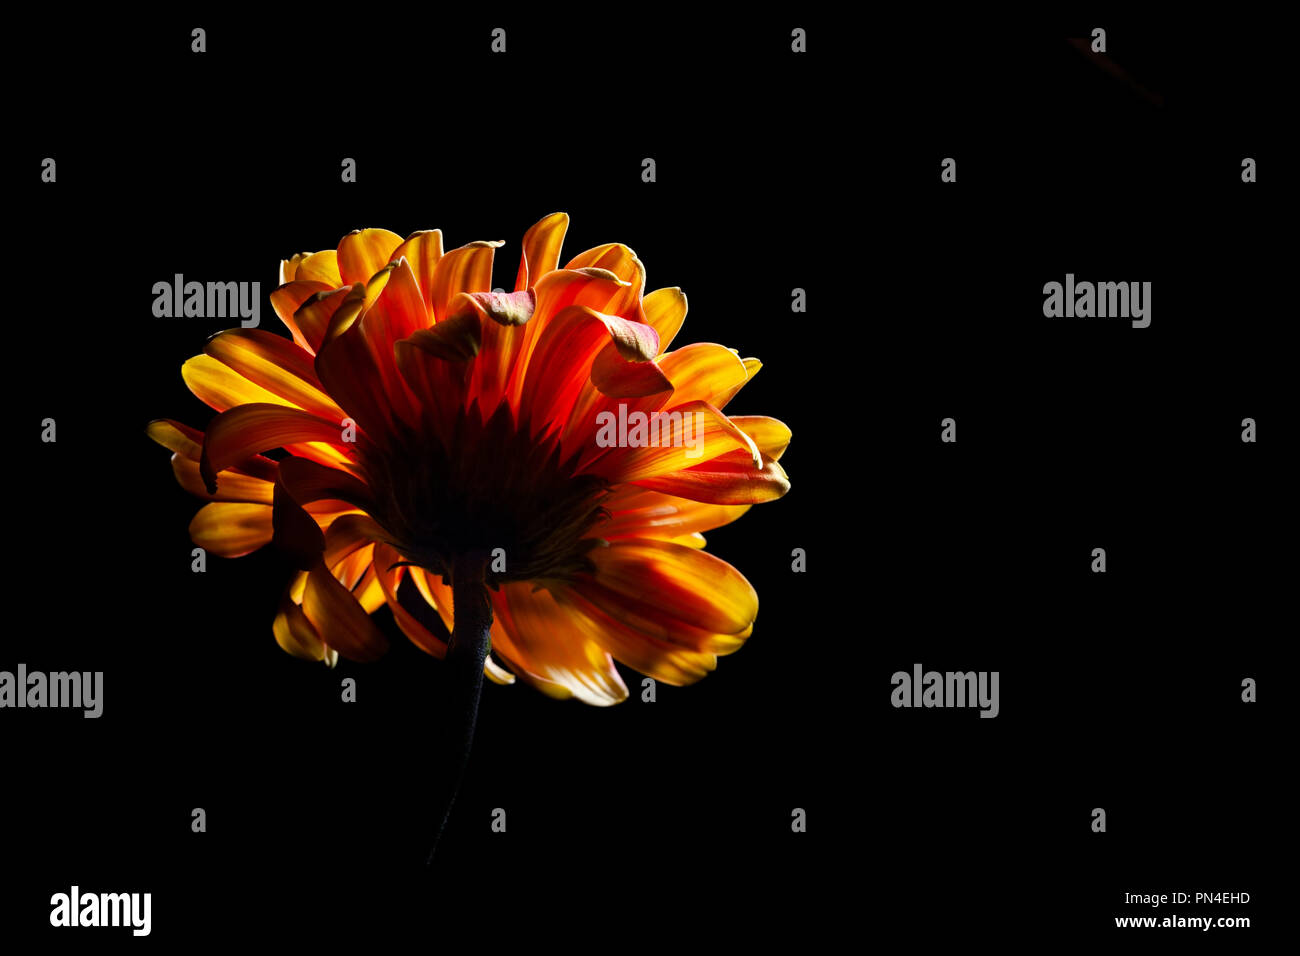 Vivid glowing daisy flower head facing up on black background Stock Photo